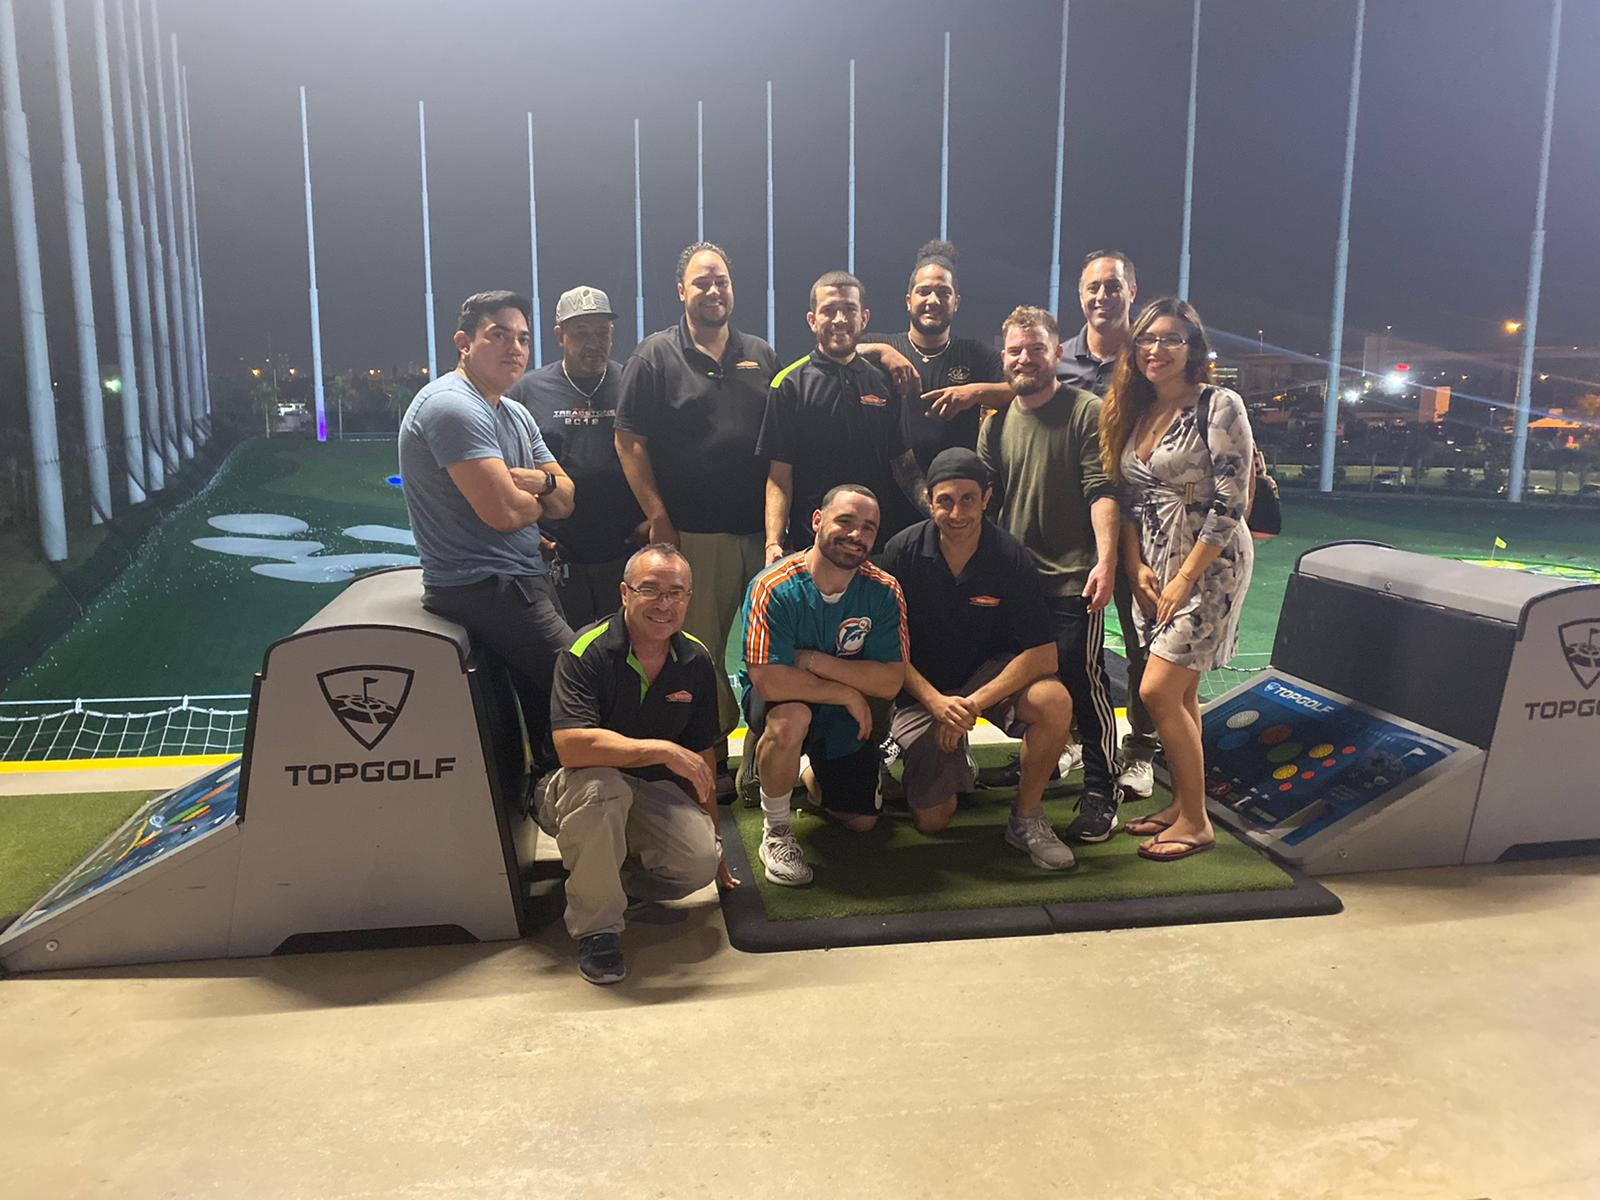 Office Holiday Party at Top Golf!